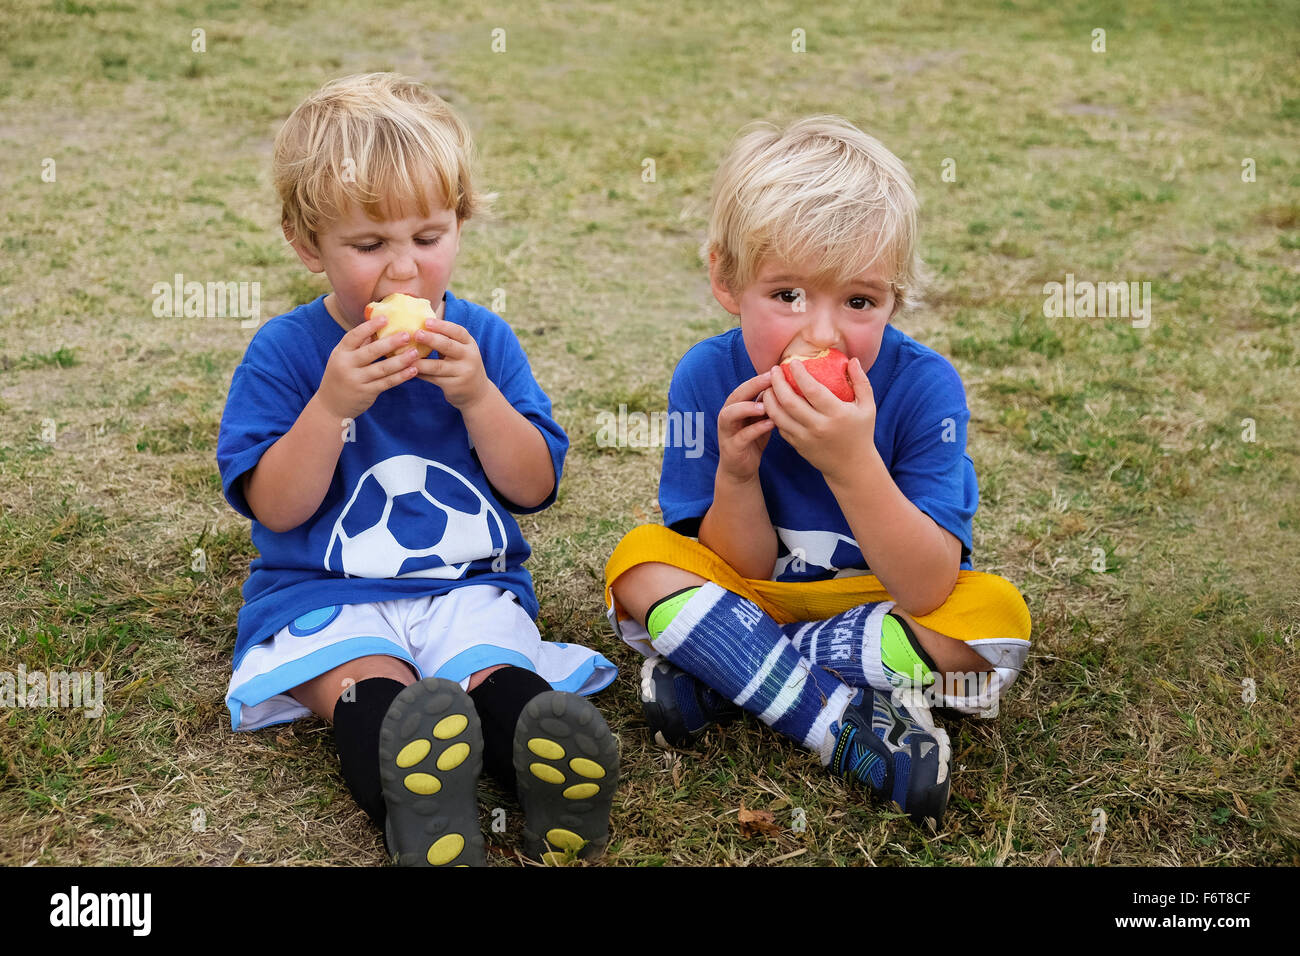 Caucasian soccer players eating apples Stock Photo